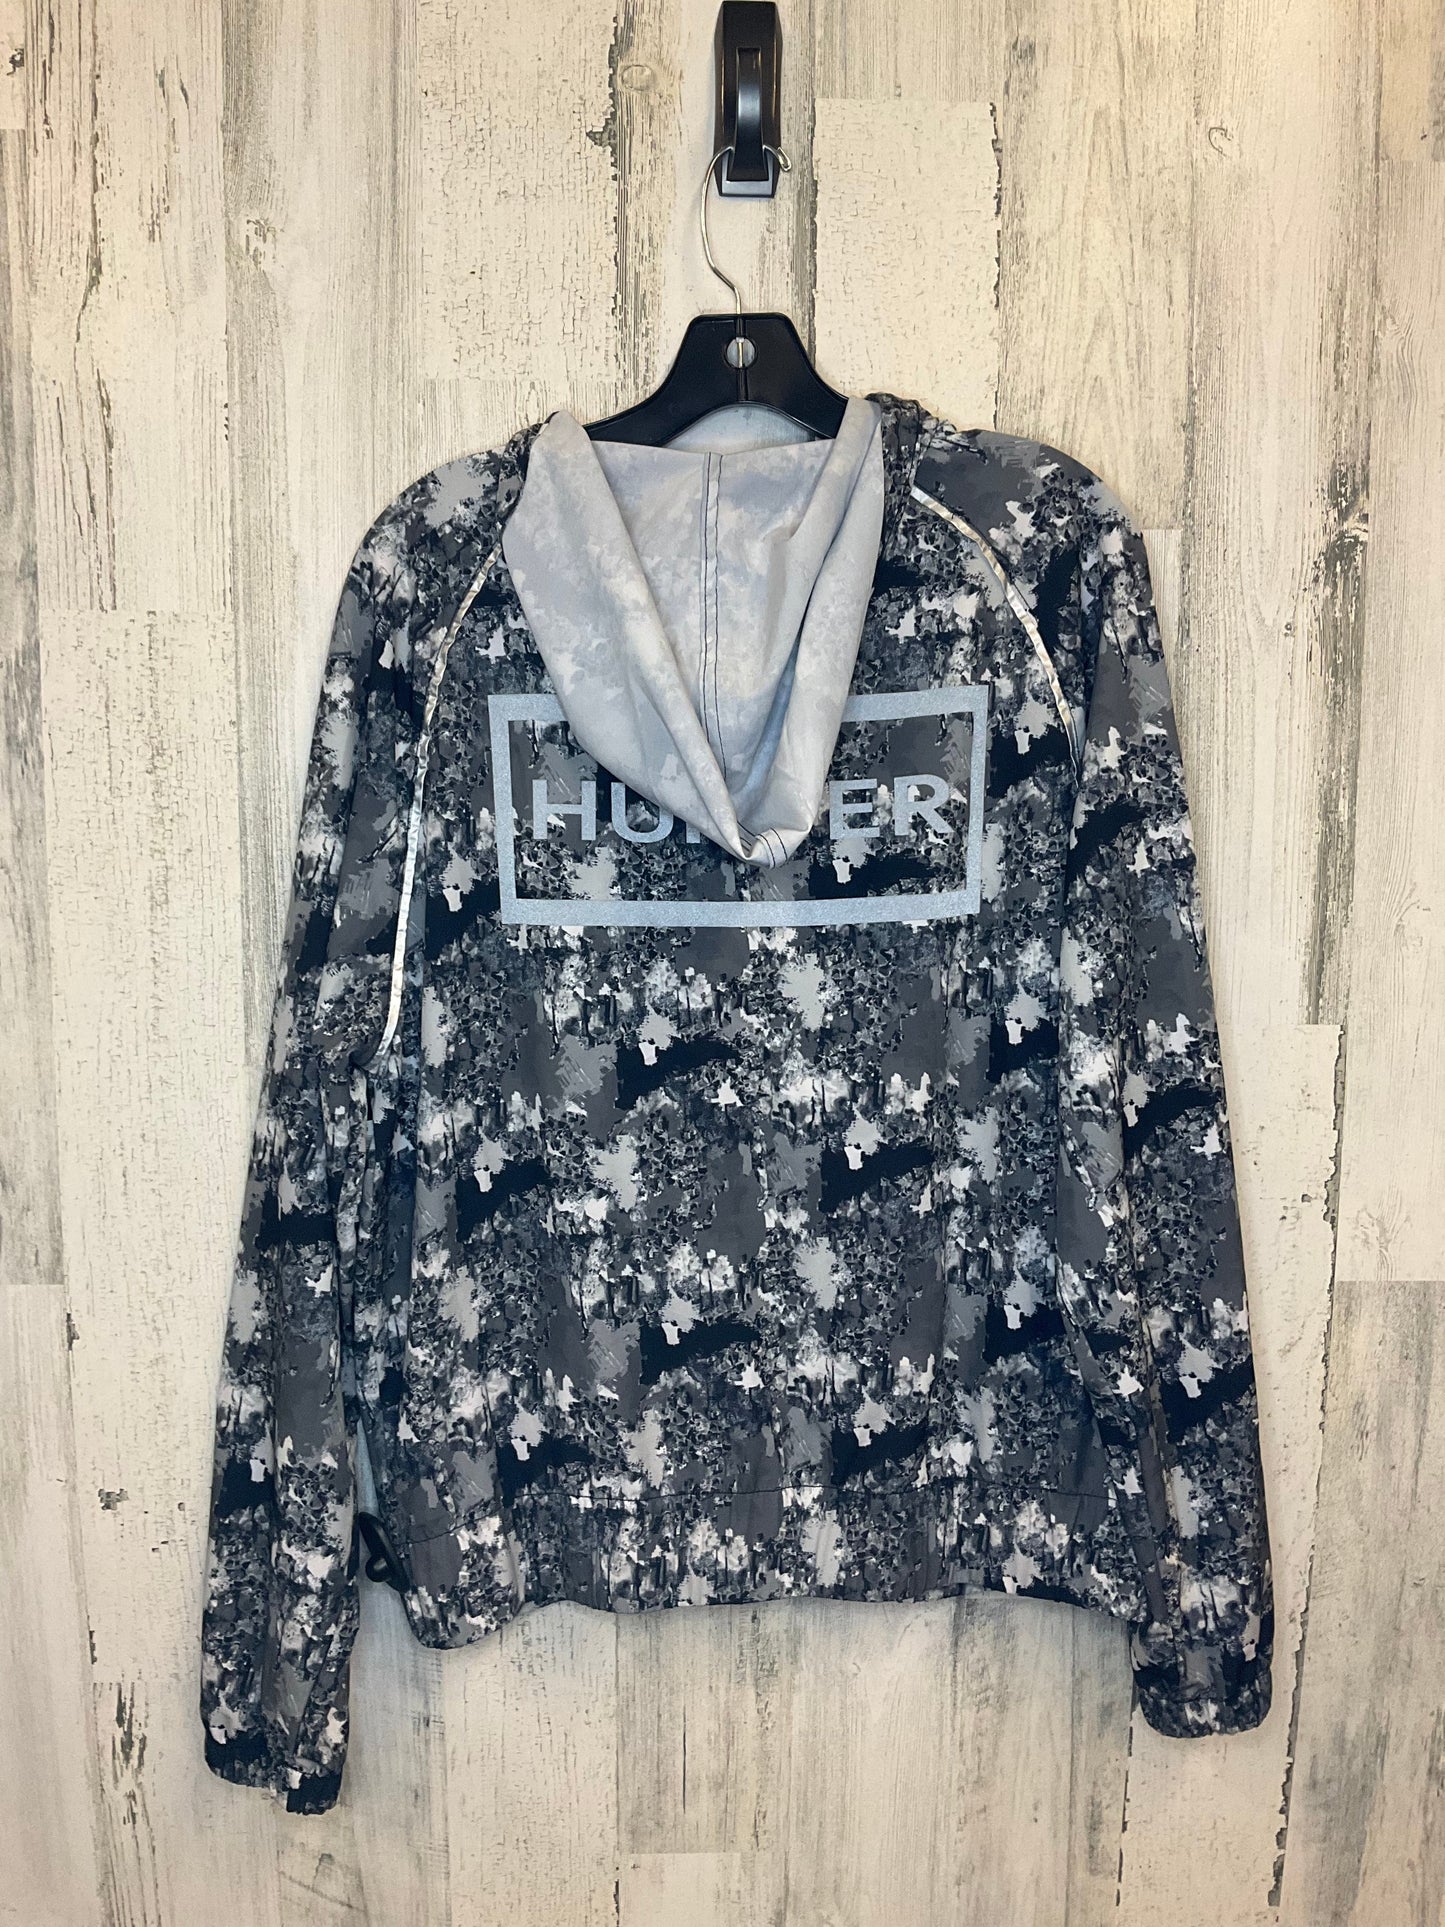 Jacket Other By Hunter  Size: M